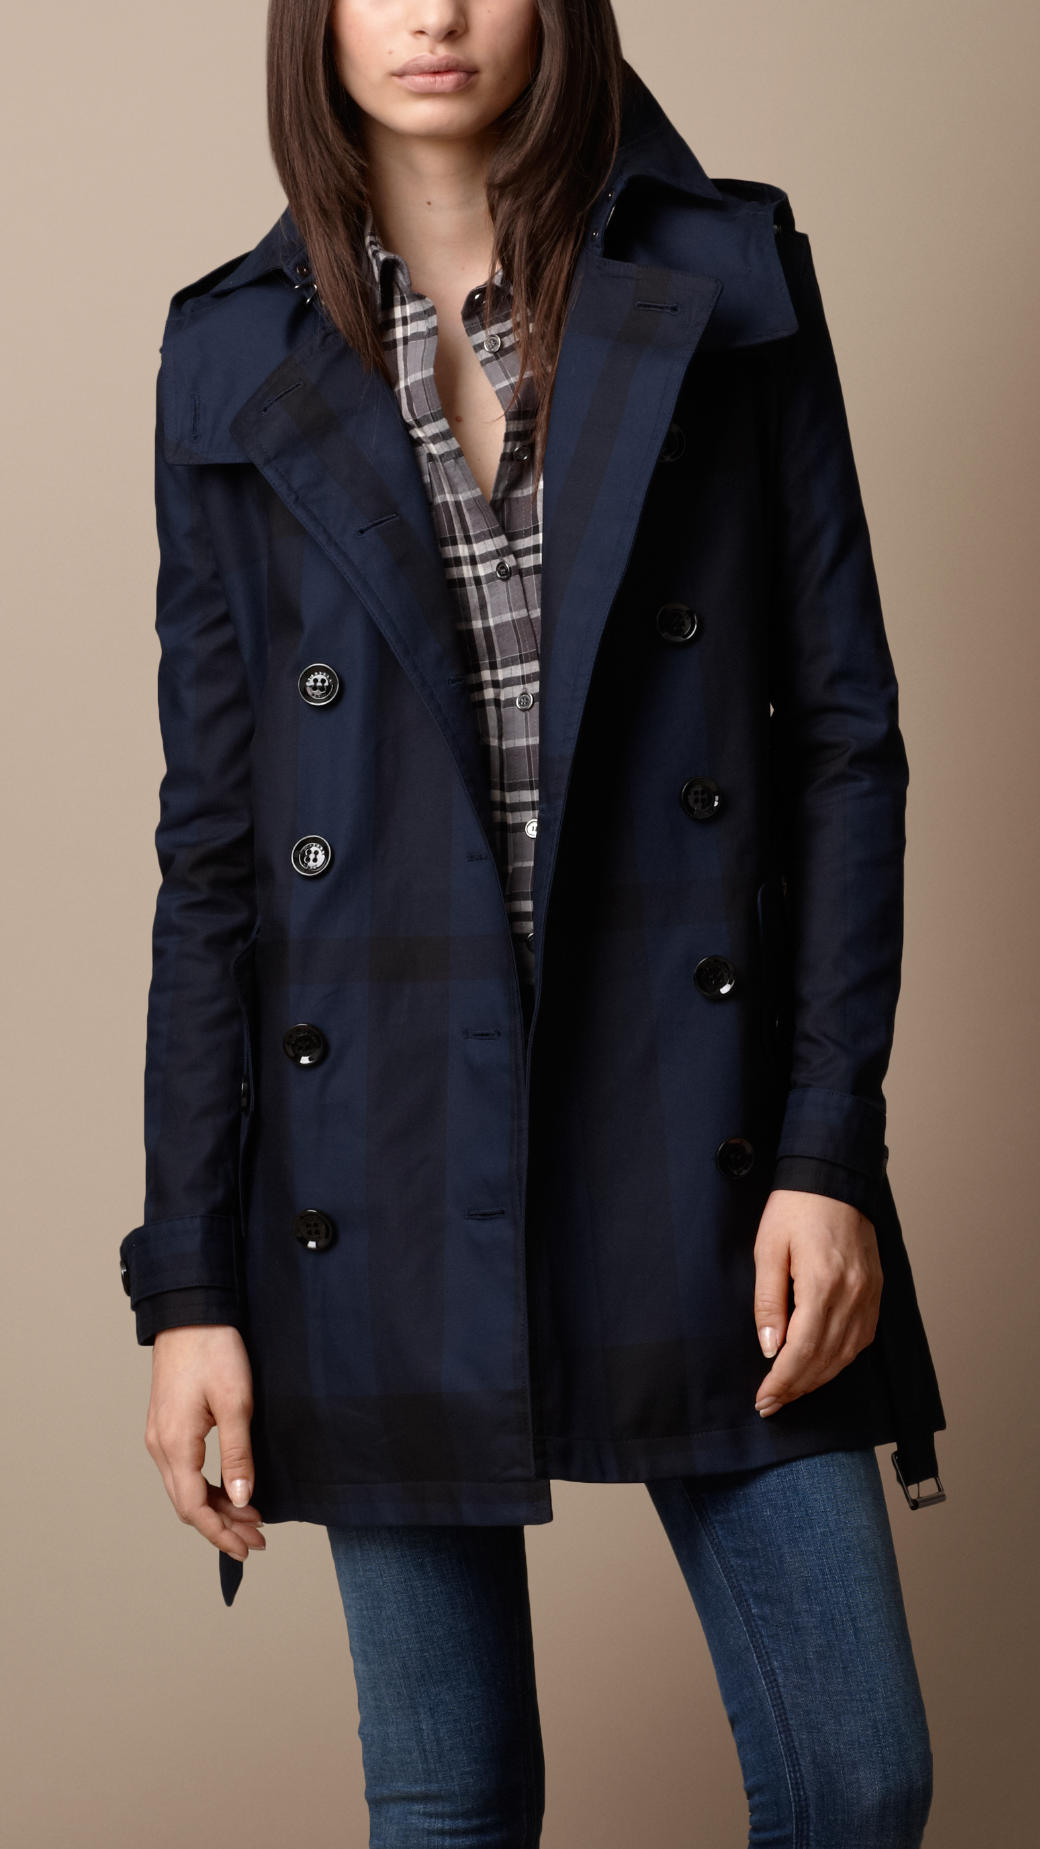 burberry navy trench,OFF 80%,www.concordehotels.com.tr